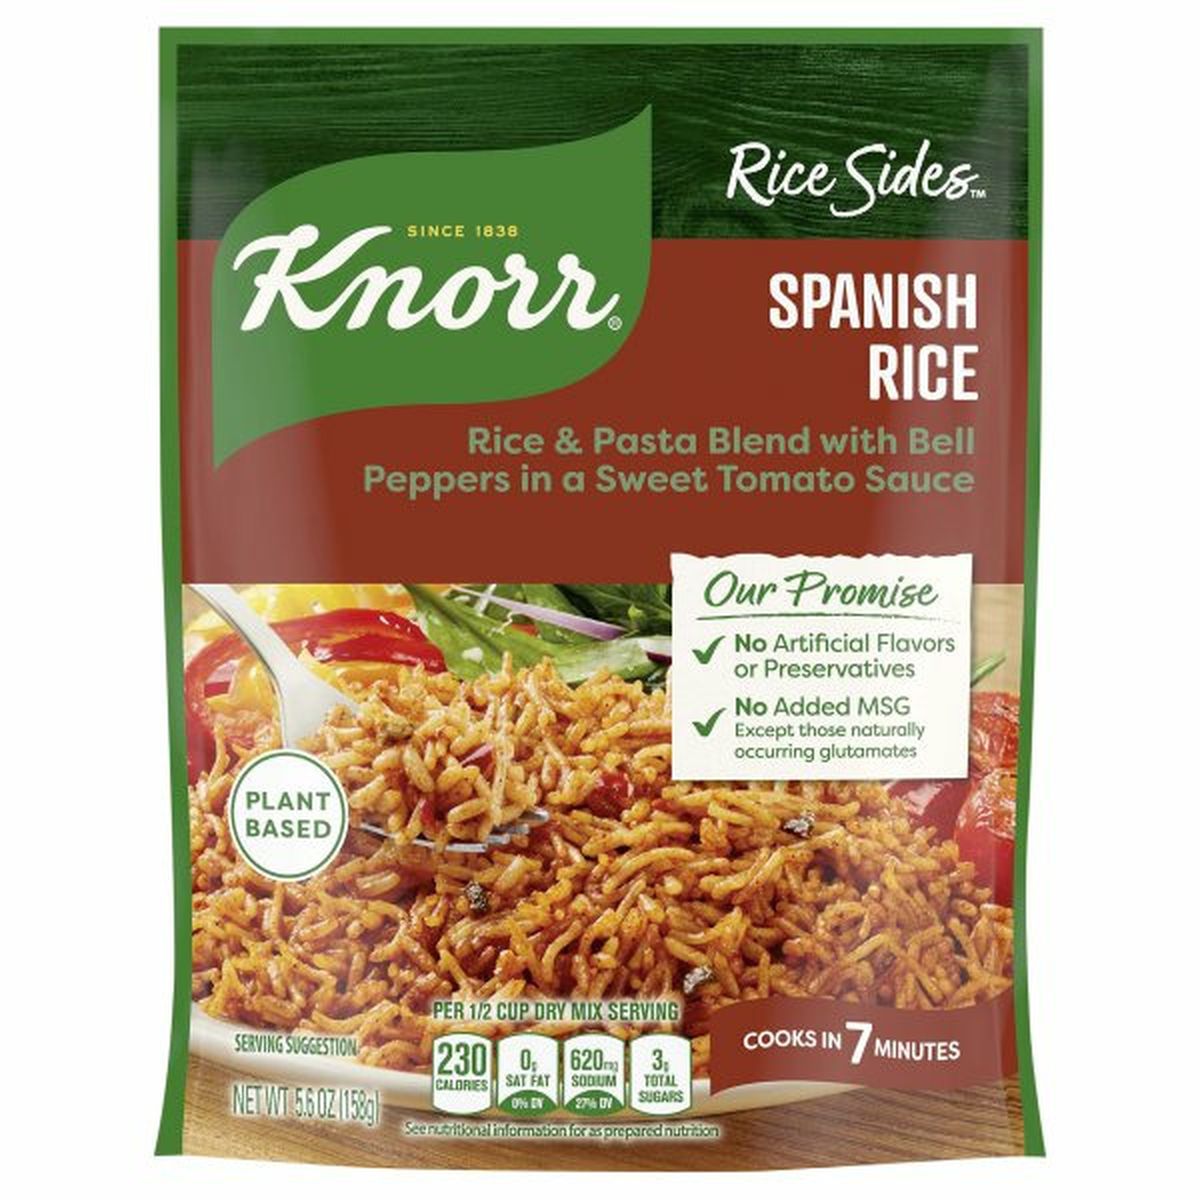 Calories in Knorr Rice Sides, Spanish Rice